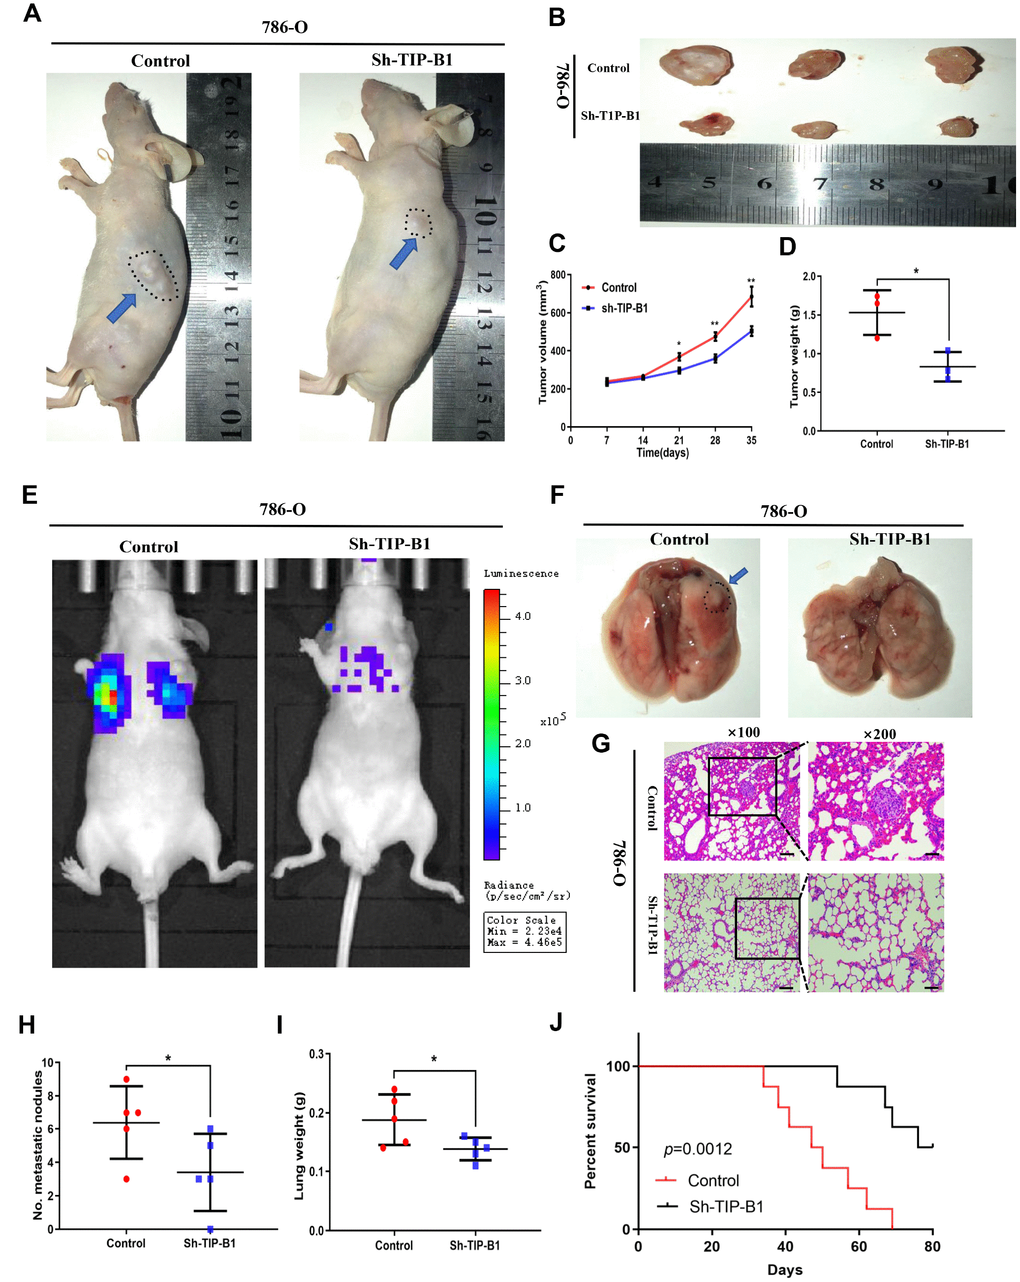 TIP-B1 knockdown inhibits KIRC tumor growth and metastasis. (A) Representative images of xenografts (arrows) were taken 5 weeks after injection. (B) The gross of tumors in sh-TIP-B1 and control groups. (C–D) Analysis of tumor volume (C) and weight (D) of xenograft tumors. (E) Representative images of metastasis by an in vivo bioluminescence imaging system. (F) Macroscopic appearance of lung metastatic nodule(arrows). (G) HE images of pulmonary micrometastases. (H) the number of pulmonary metastasis were compared. (I) Weights of the lung were compared. (J) Mouse survival curves.